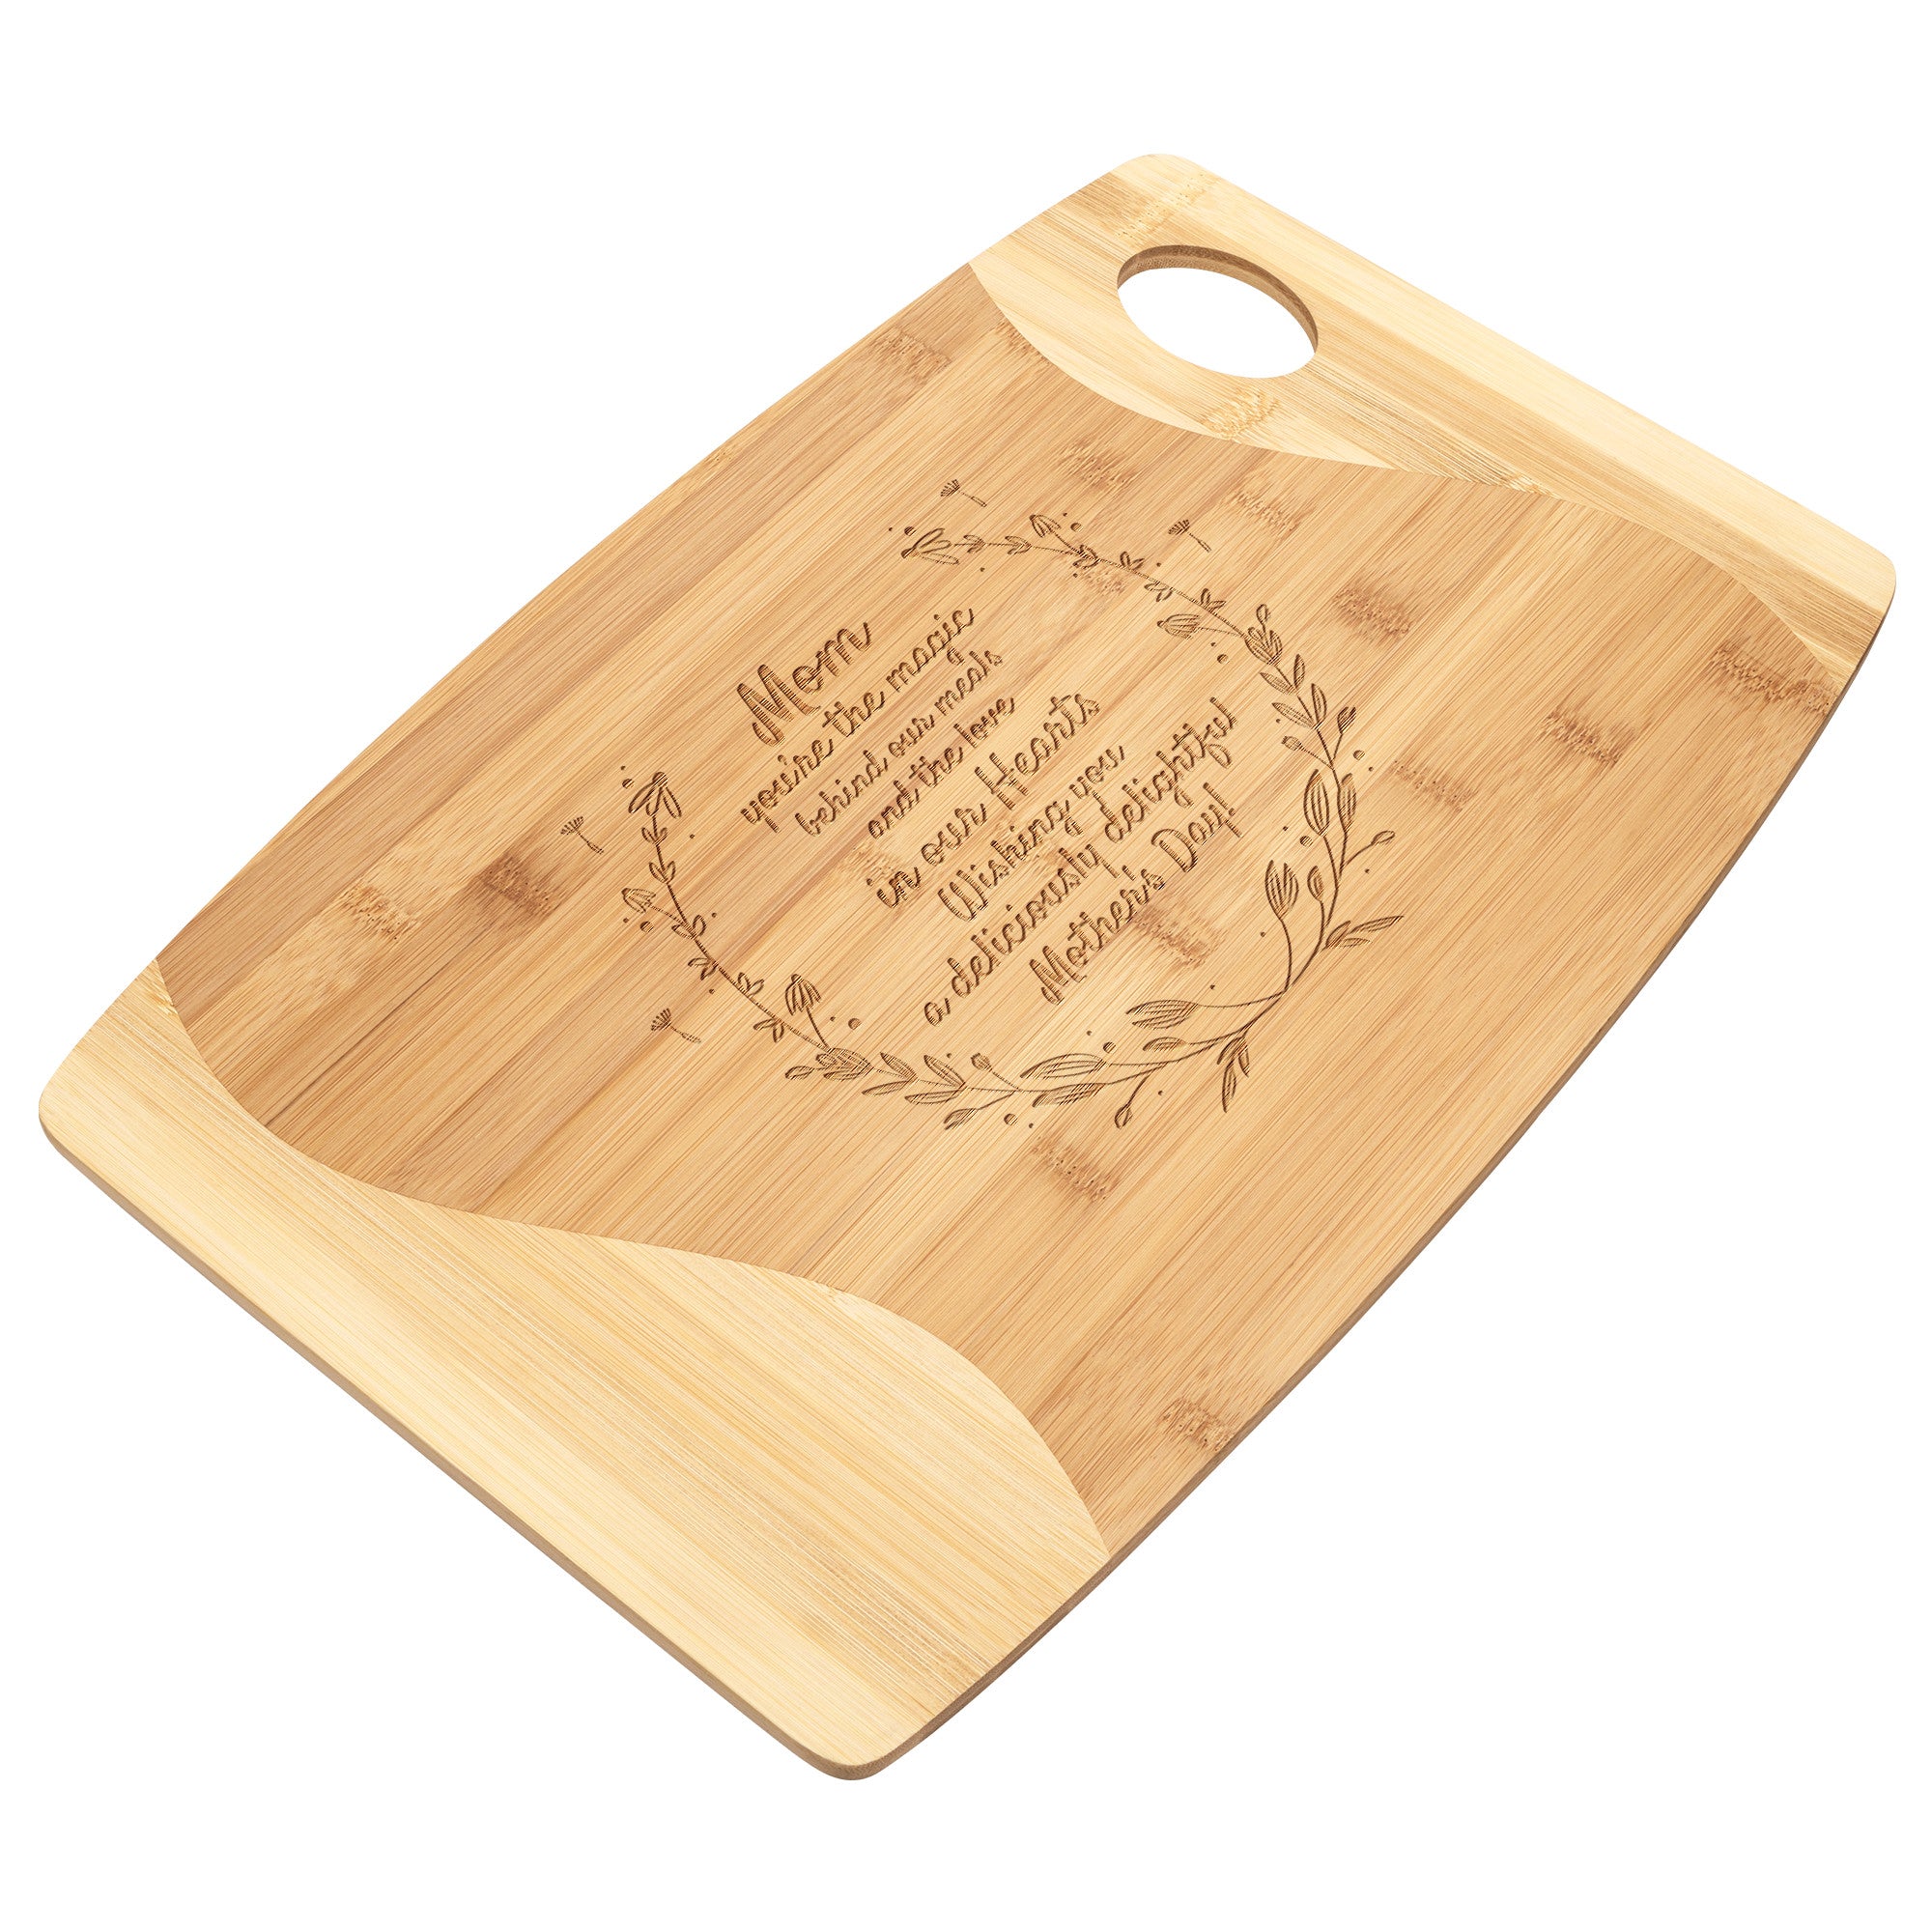 You're the Magic - Cutting Board for Mother's Day